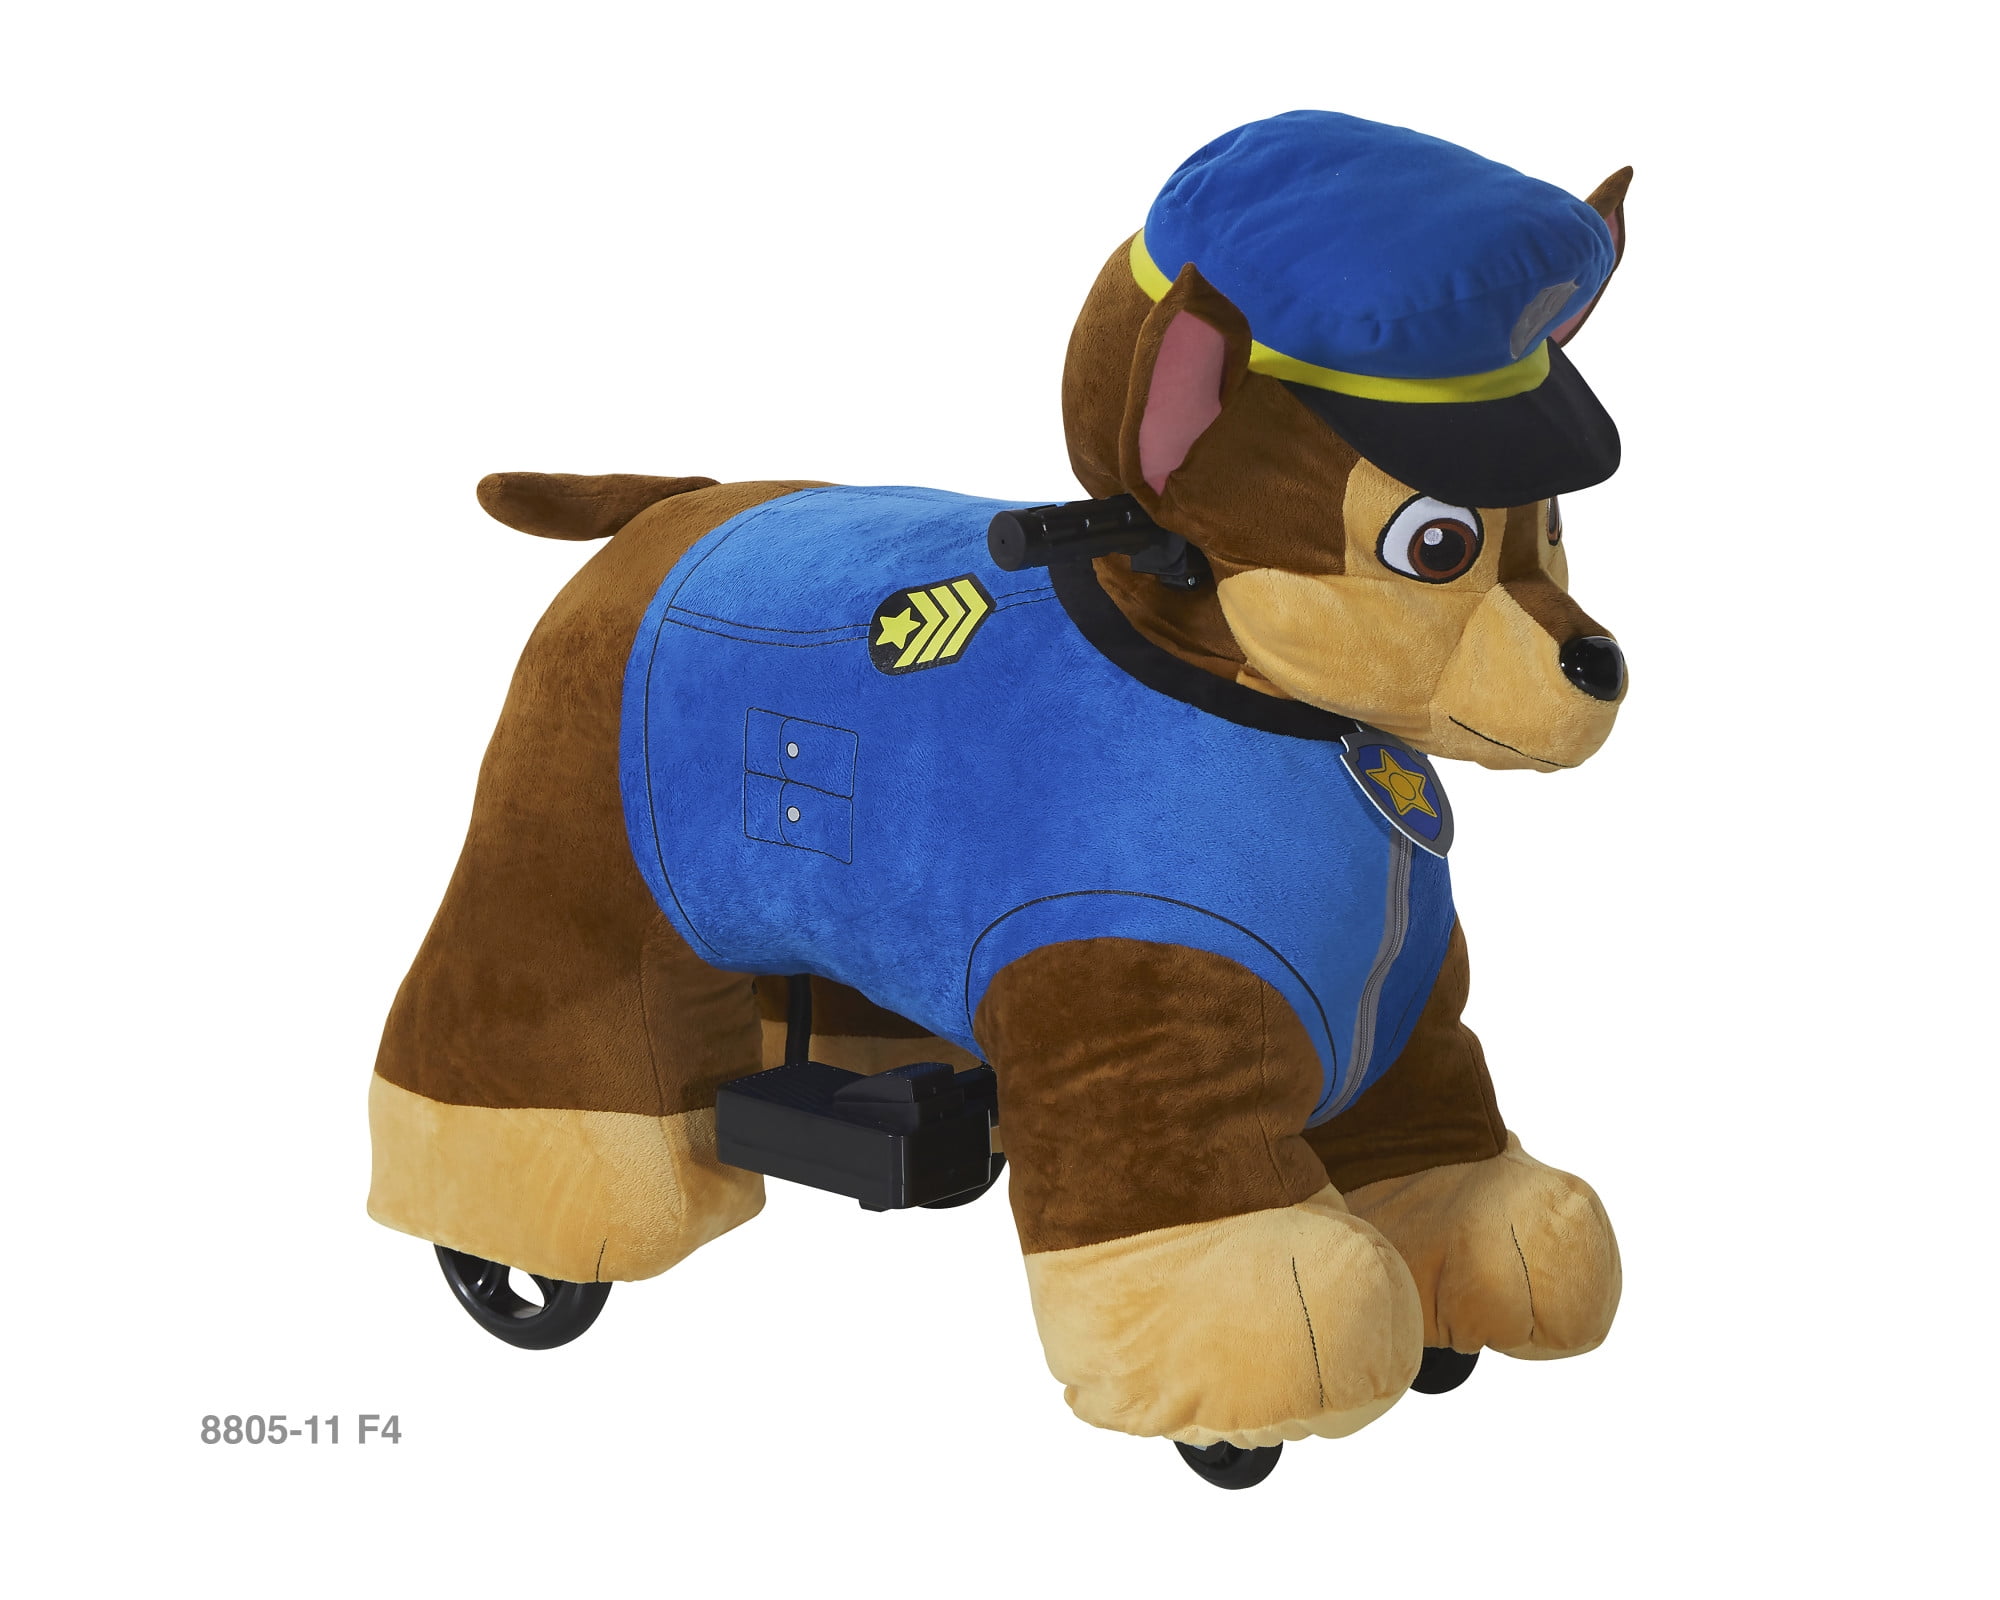 NEW Paw Patrol 6V Plush Battery Powered Ride On Rechargeable Birthday Gift 